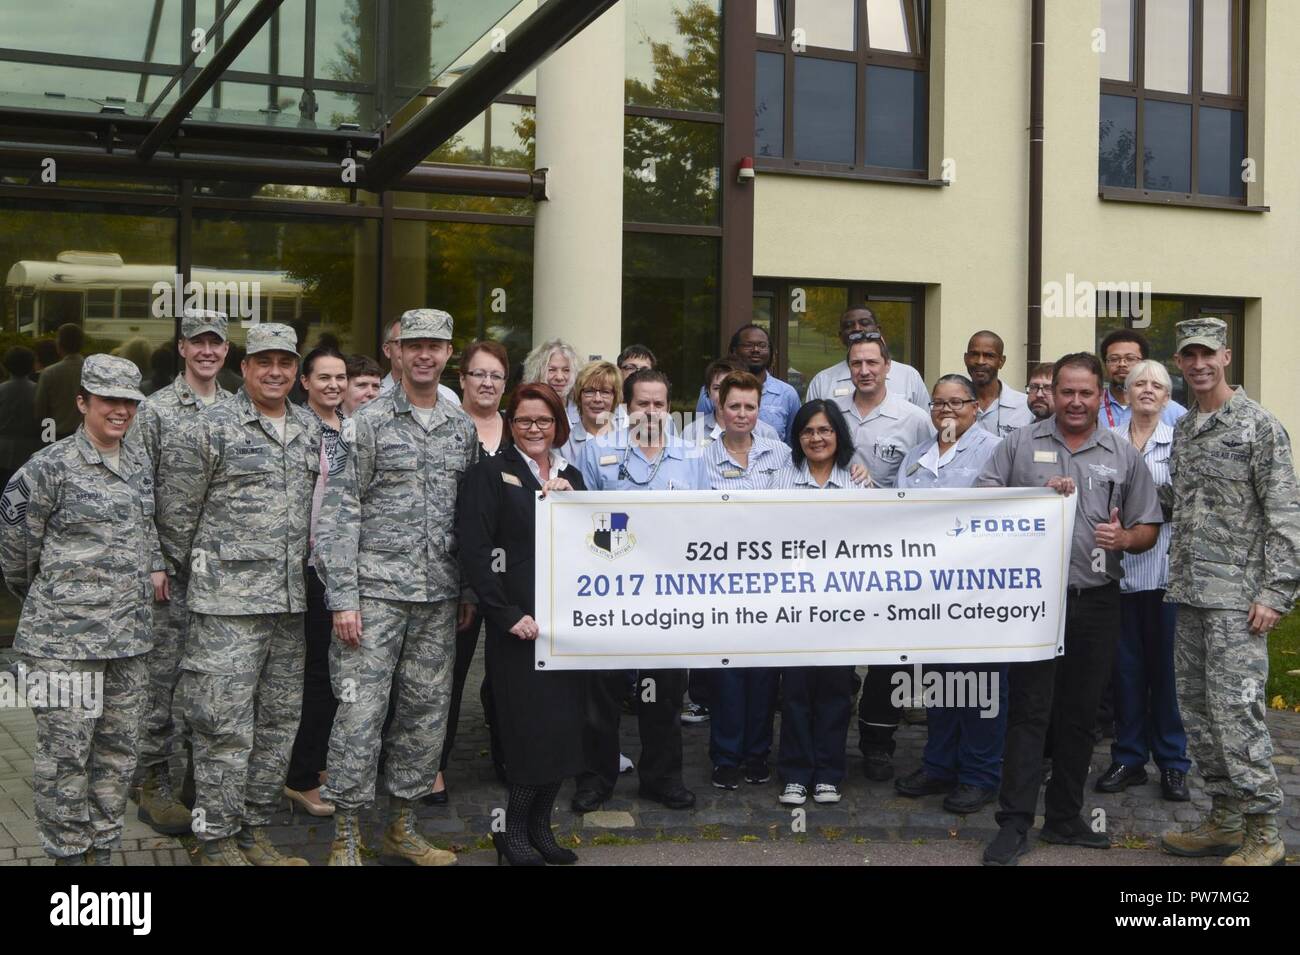 Col. Jason Bailey, 52nd Fighter Wing command, and Chief Master Sgt. Edwin Ludwigsen, 52nd FW command chief, pose with members of the Eifel Arms Inn at Spangdahlem Air Base, Germany, September 26, 2017. The Eifel Arms Inn celebrated its fifth win as the Best Lodging in the Air Force - Small Category. Stock Photo